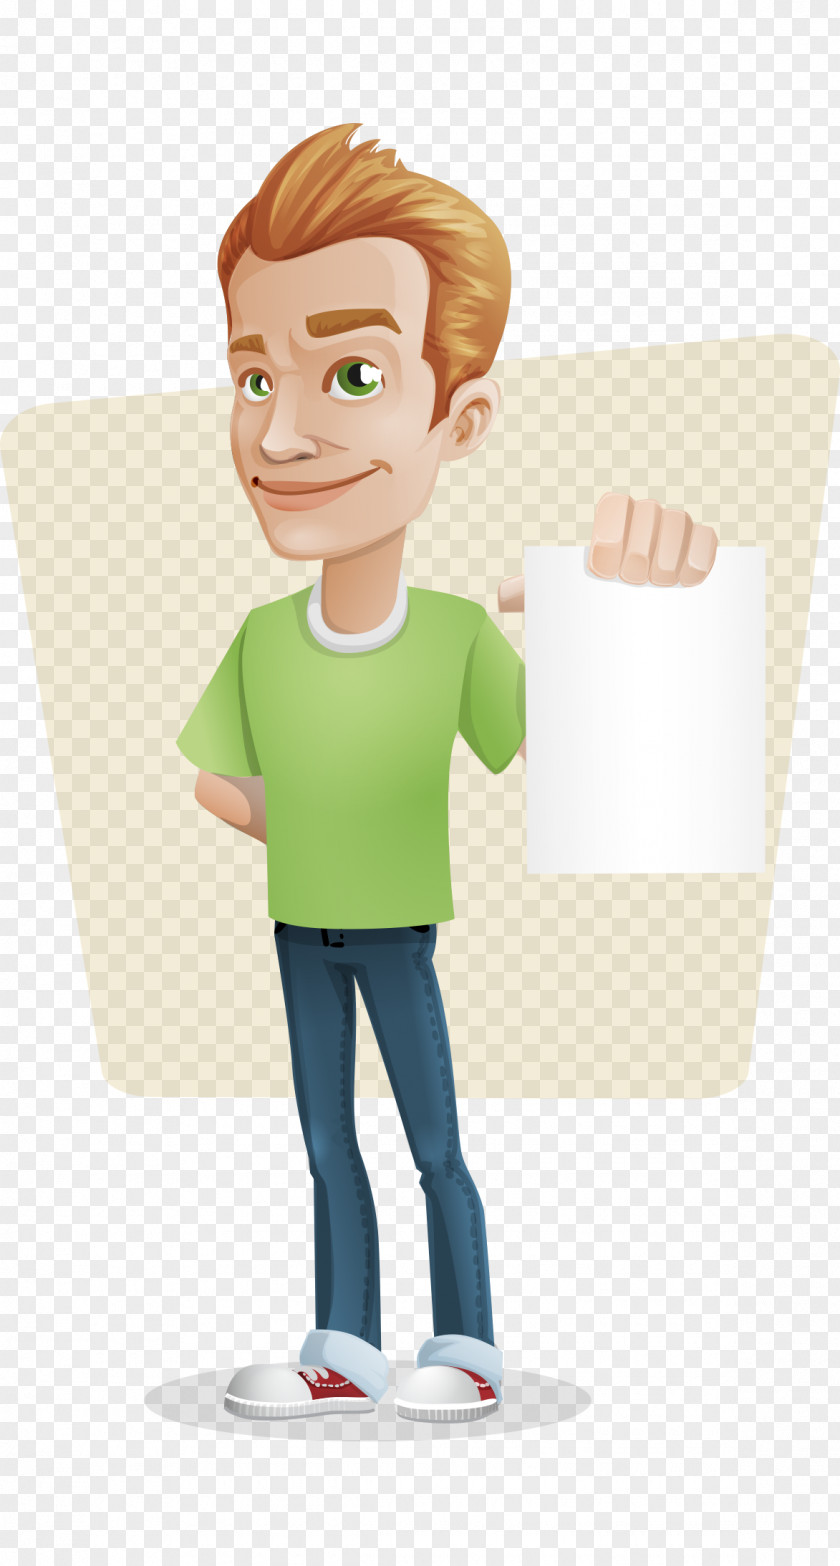 Hand-painted Cartoon Casual Man Holding The Paper Female Euclidean Vector Illustration PNG